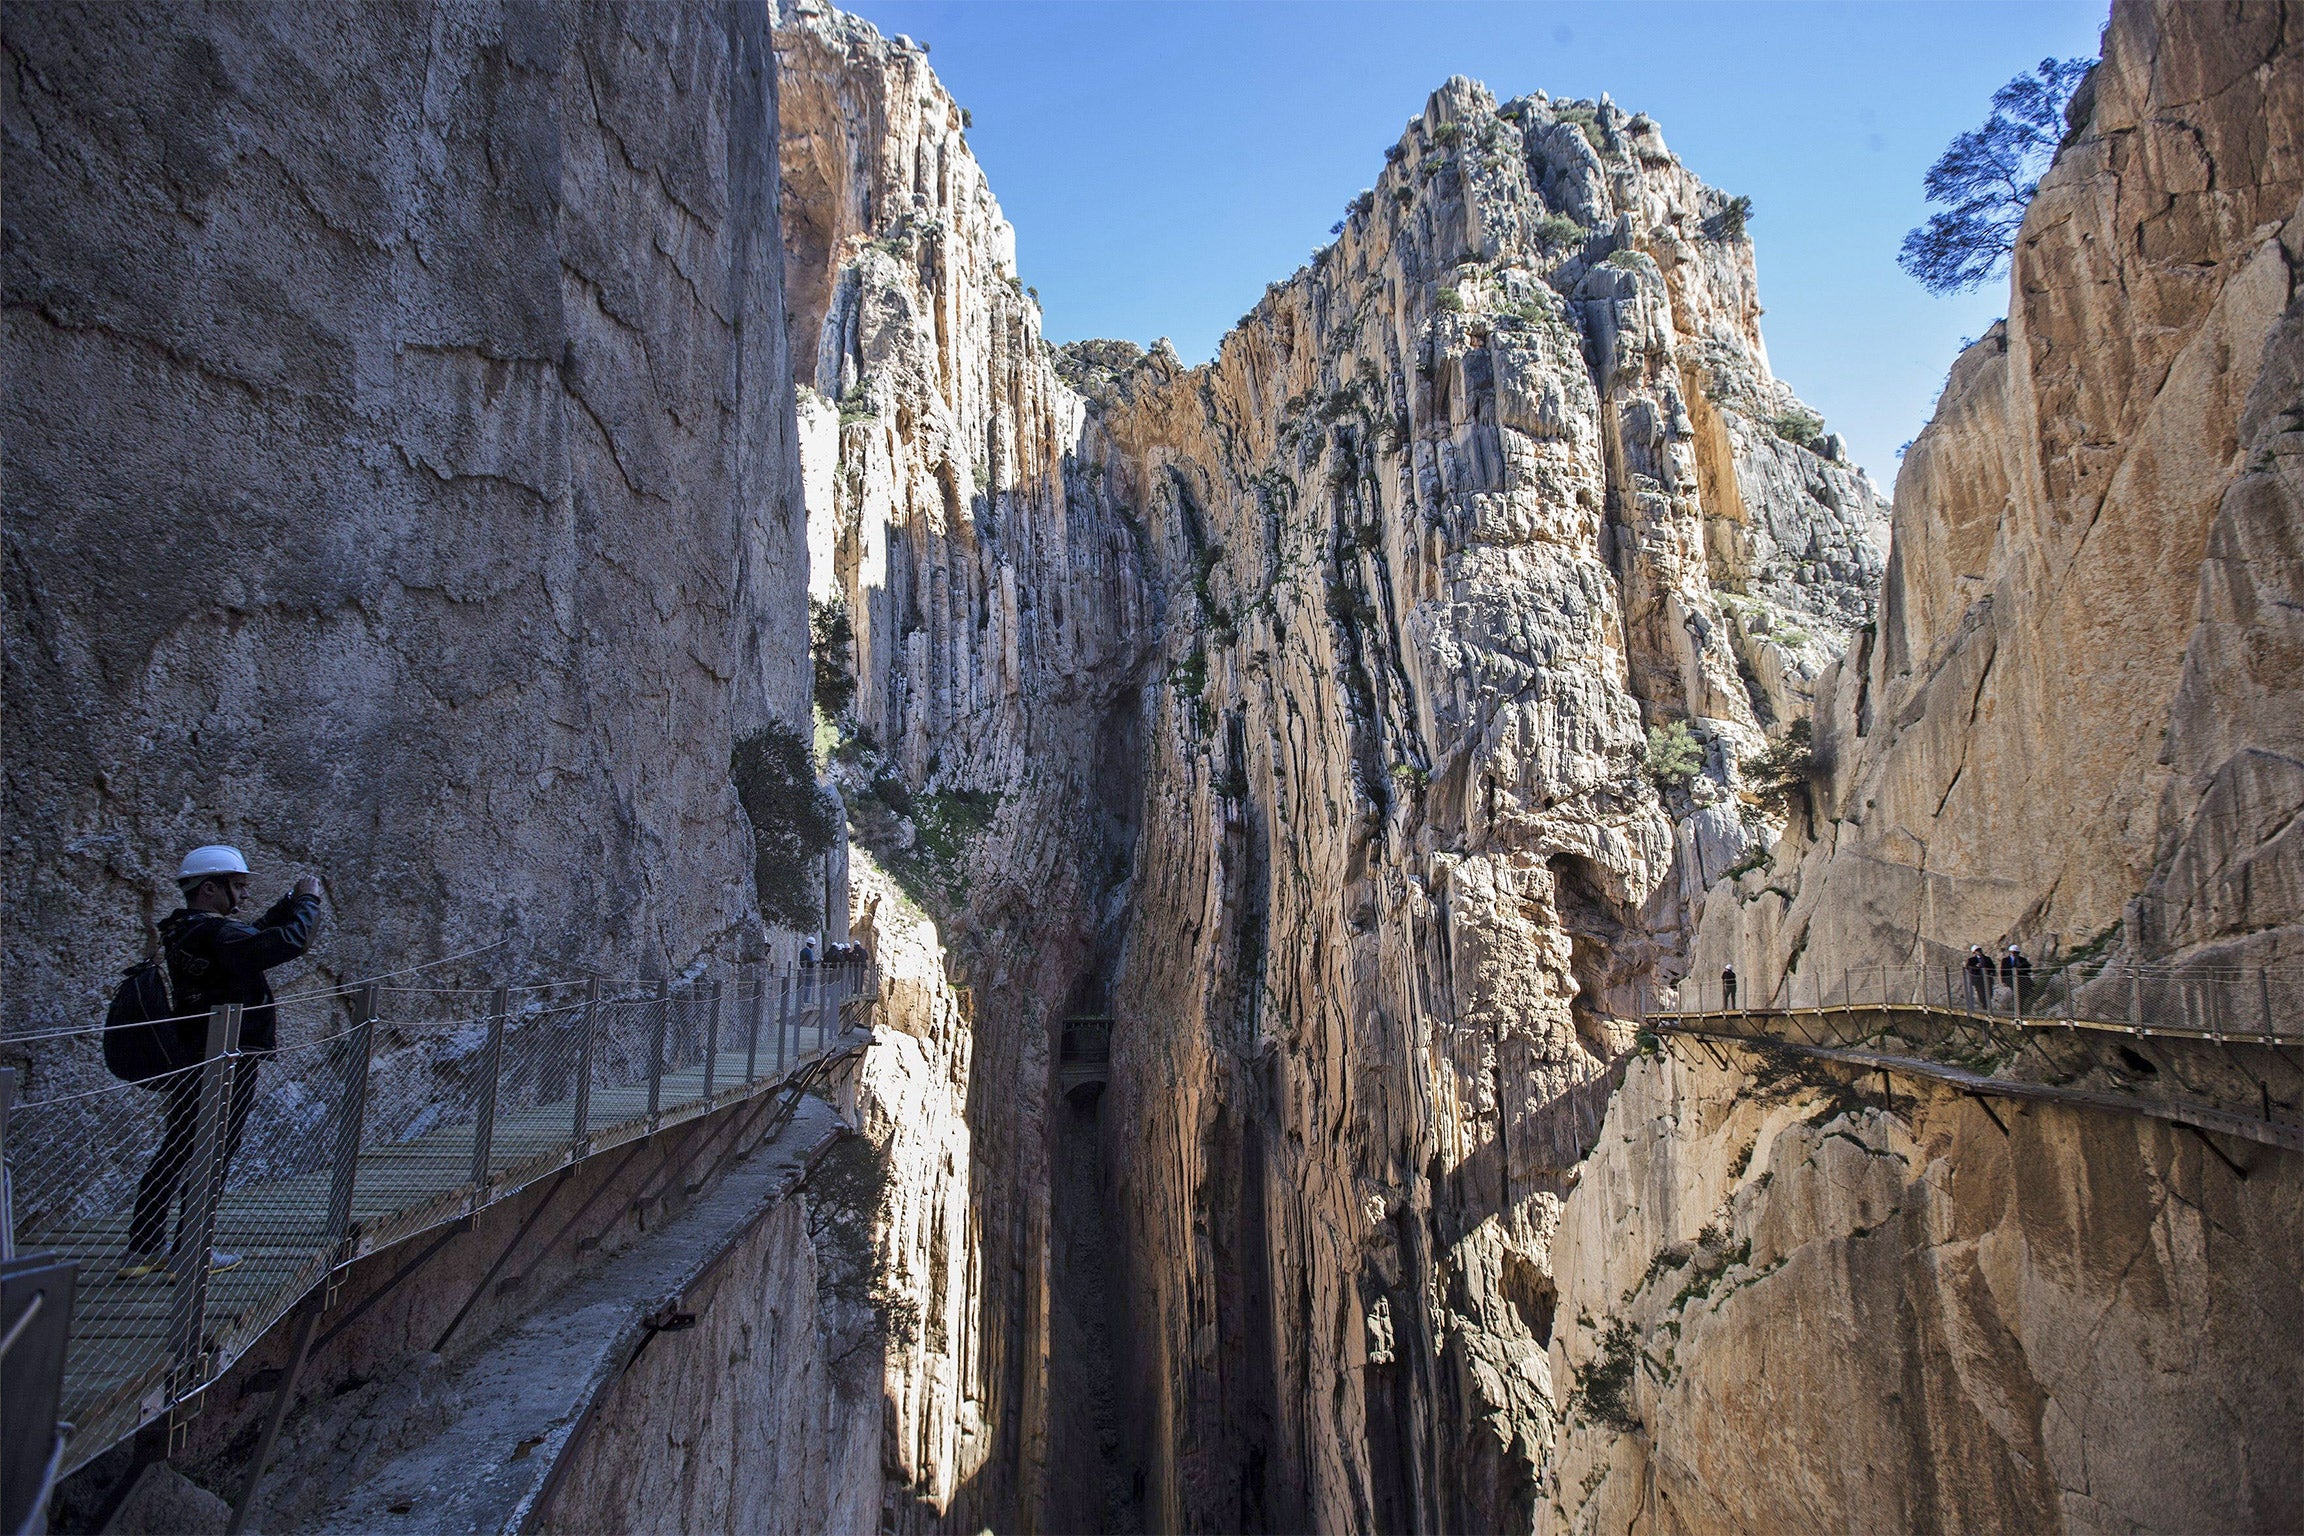 Journalists walk on the 'Caminito del Rey' (the King's little pathway) at the Gaitanes gorge at the Guadalhorce river in Malaga